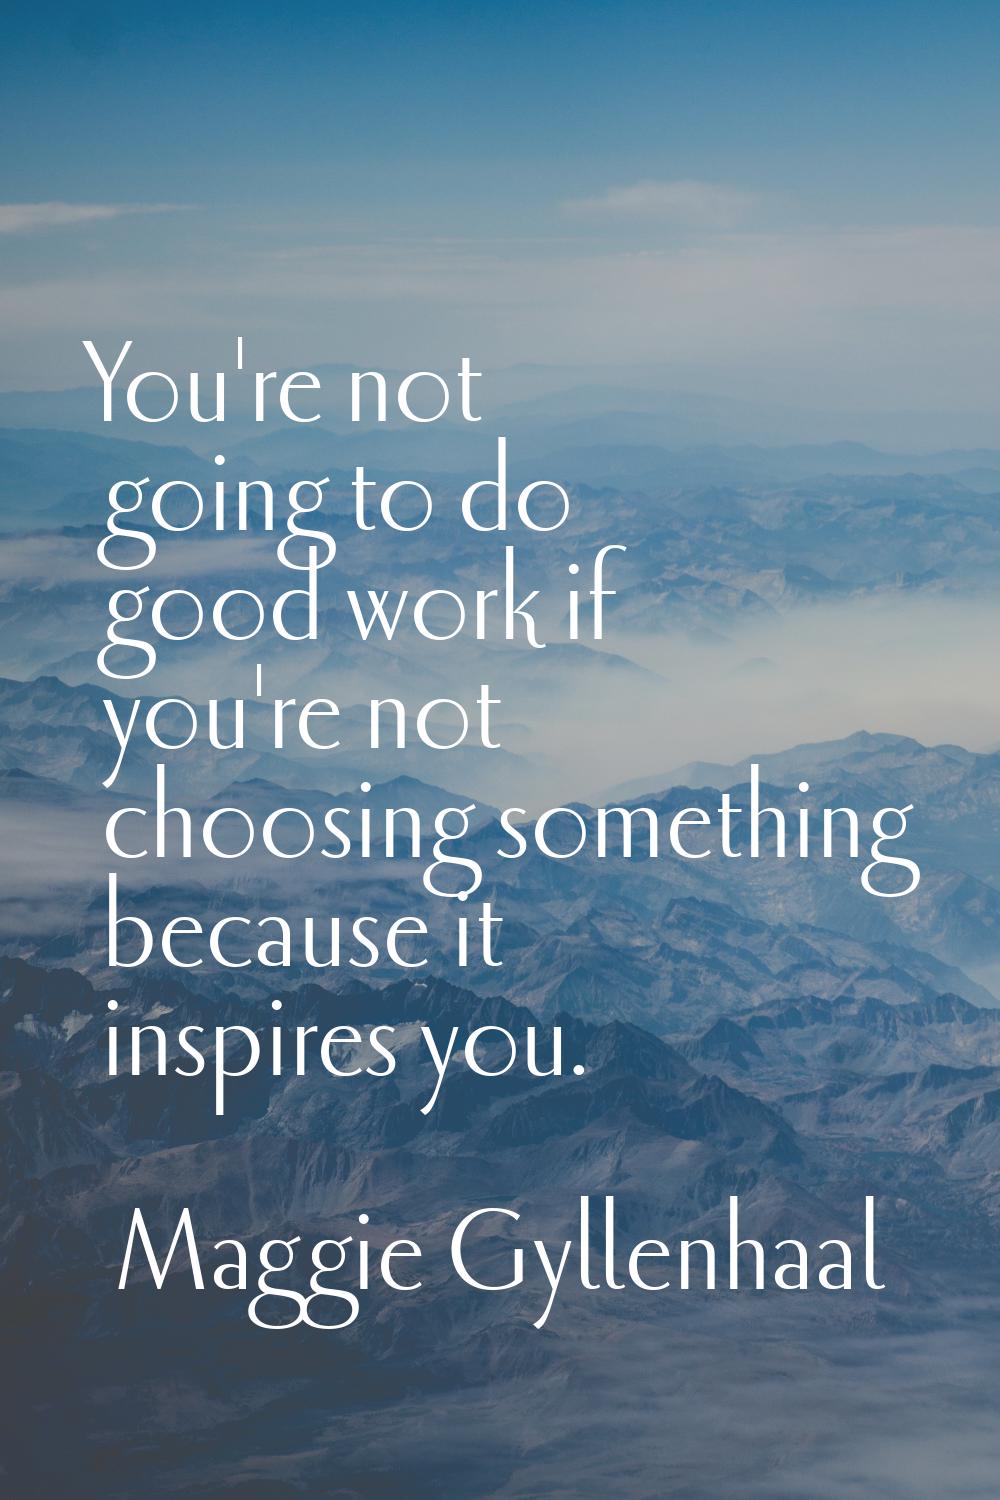 You're not going to do good work if you're not choosing something because it inspires you.